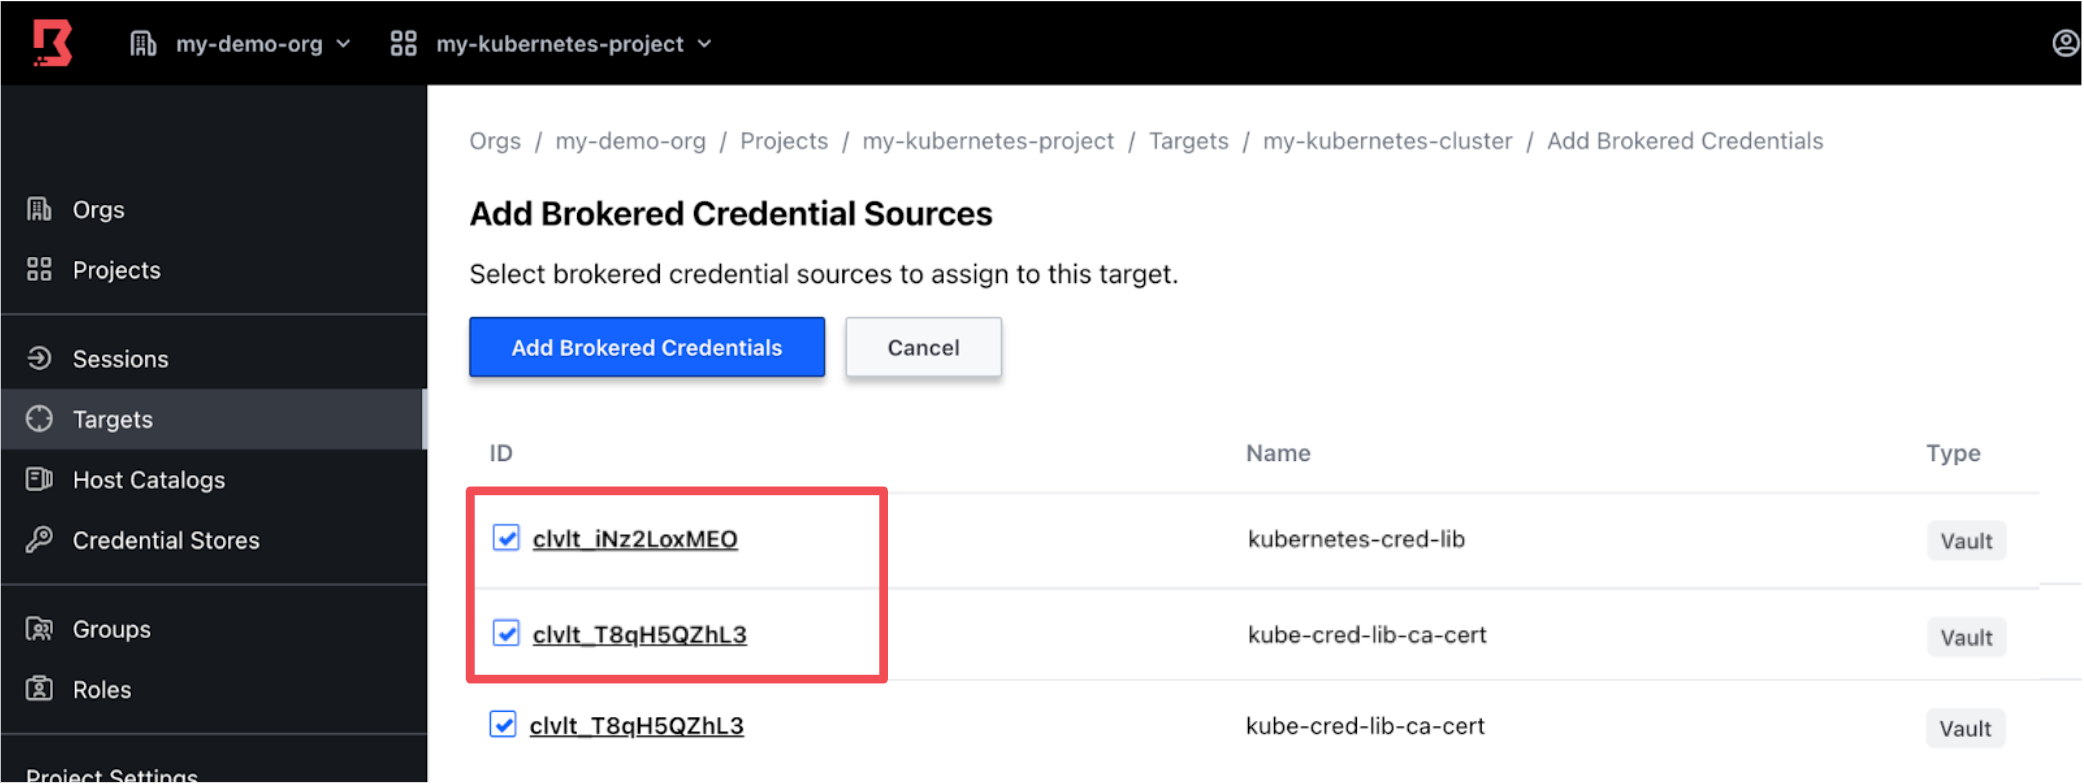 Add brokered credential sources